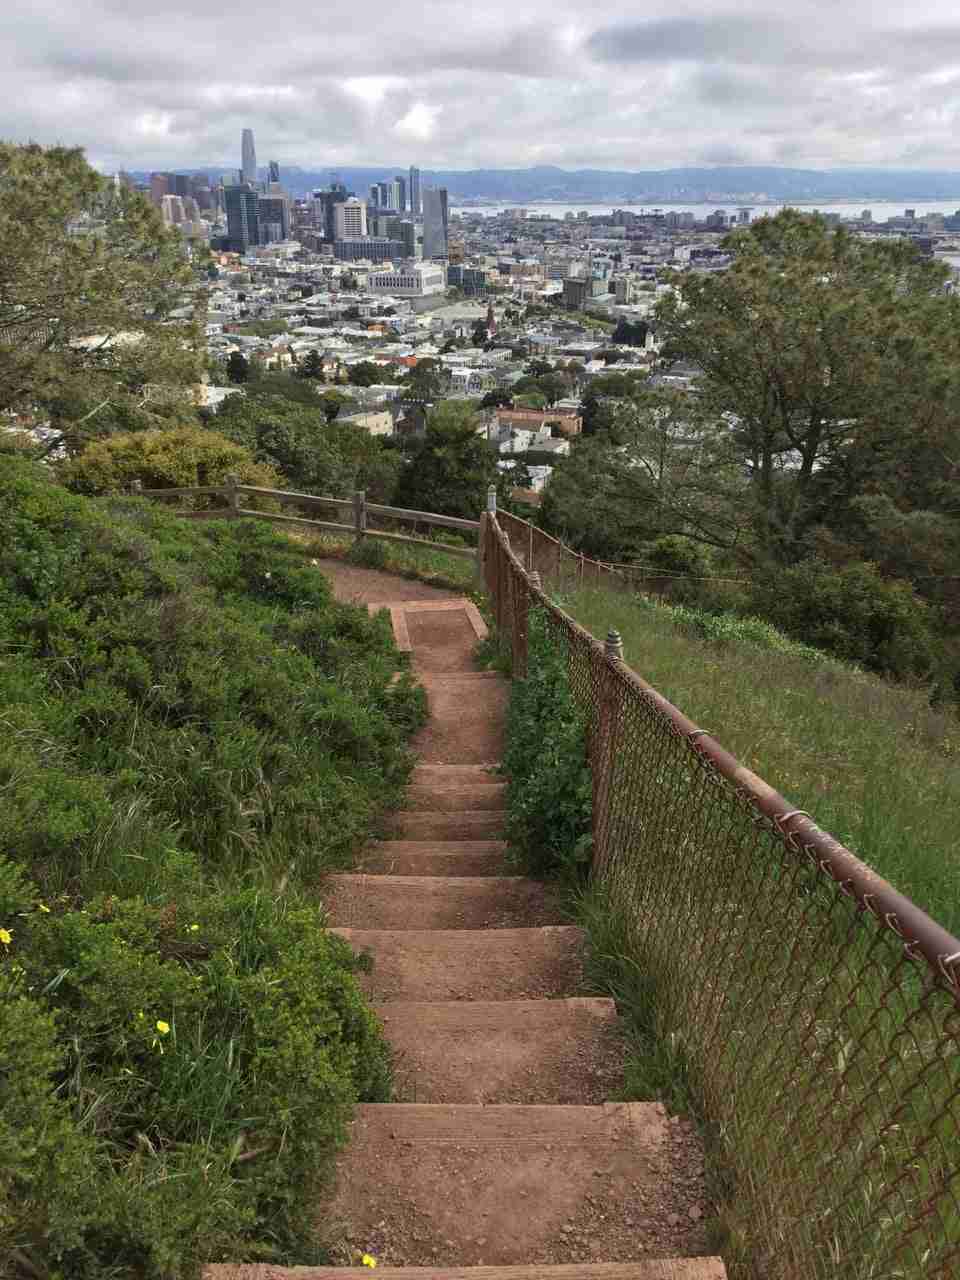 Overcast skies over a clear view of downtown San Francisco, and the East Bay in the distance, dirt steps descending in the foreground, green bushes on both sides, with a half-height rusting chain-link fence on the right.